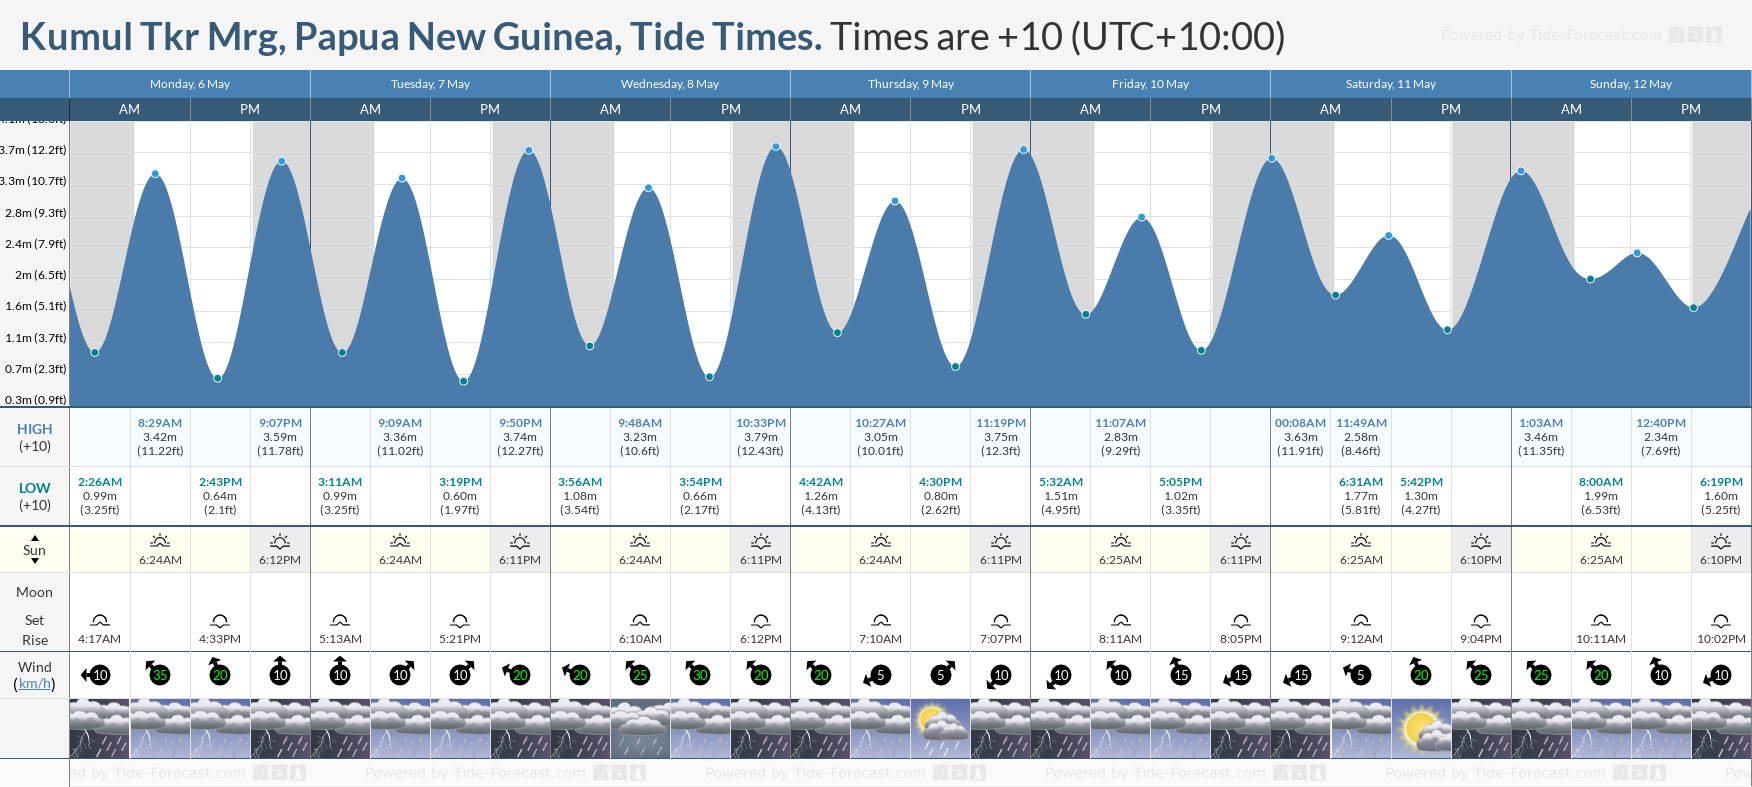 Kumul Tkr Mrg, Papua New Guinea Tide Chart including high and low tide tide times for the next 7 days